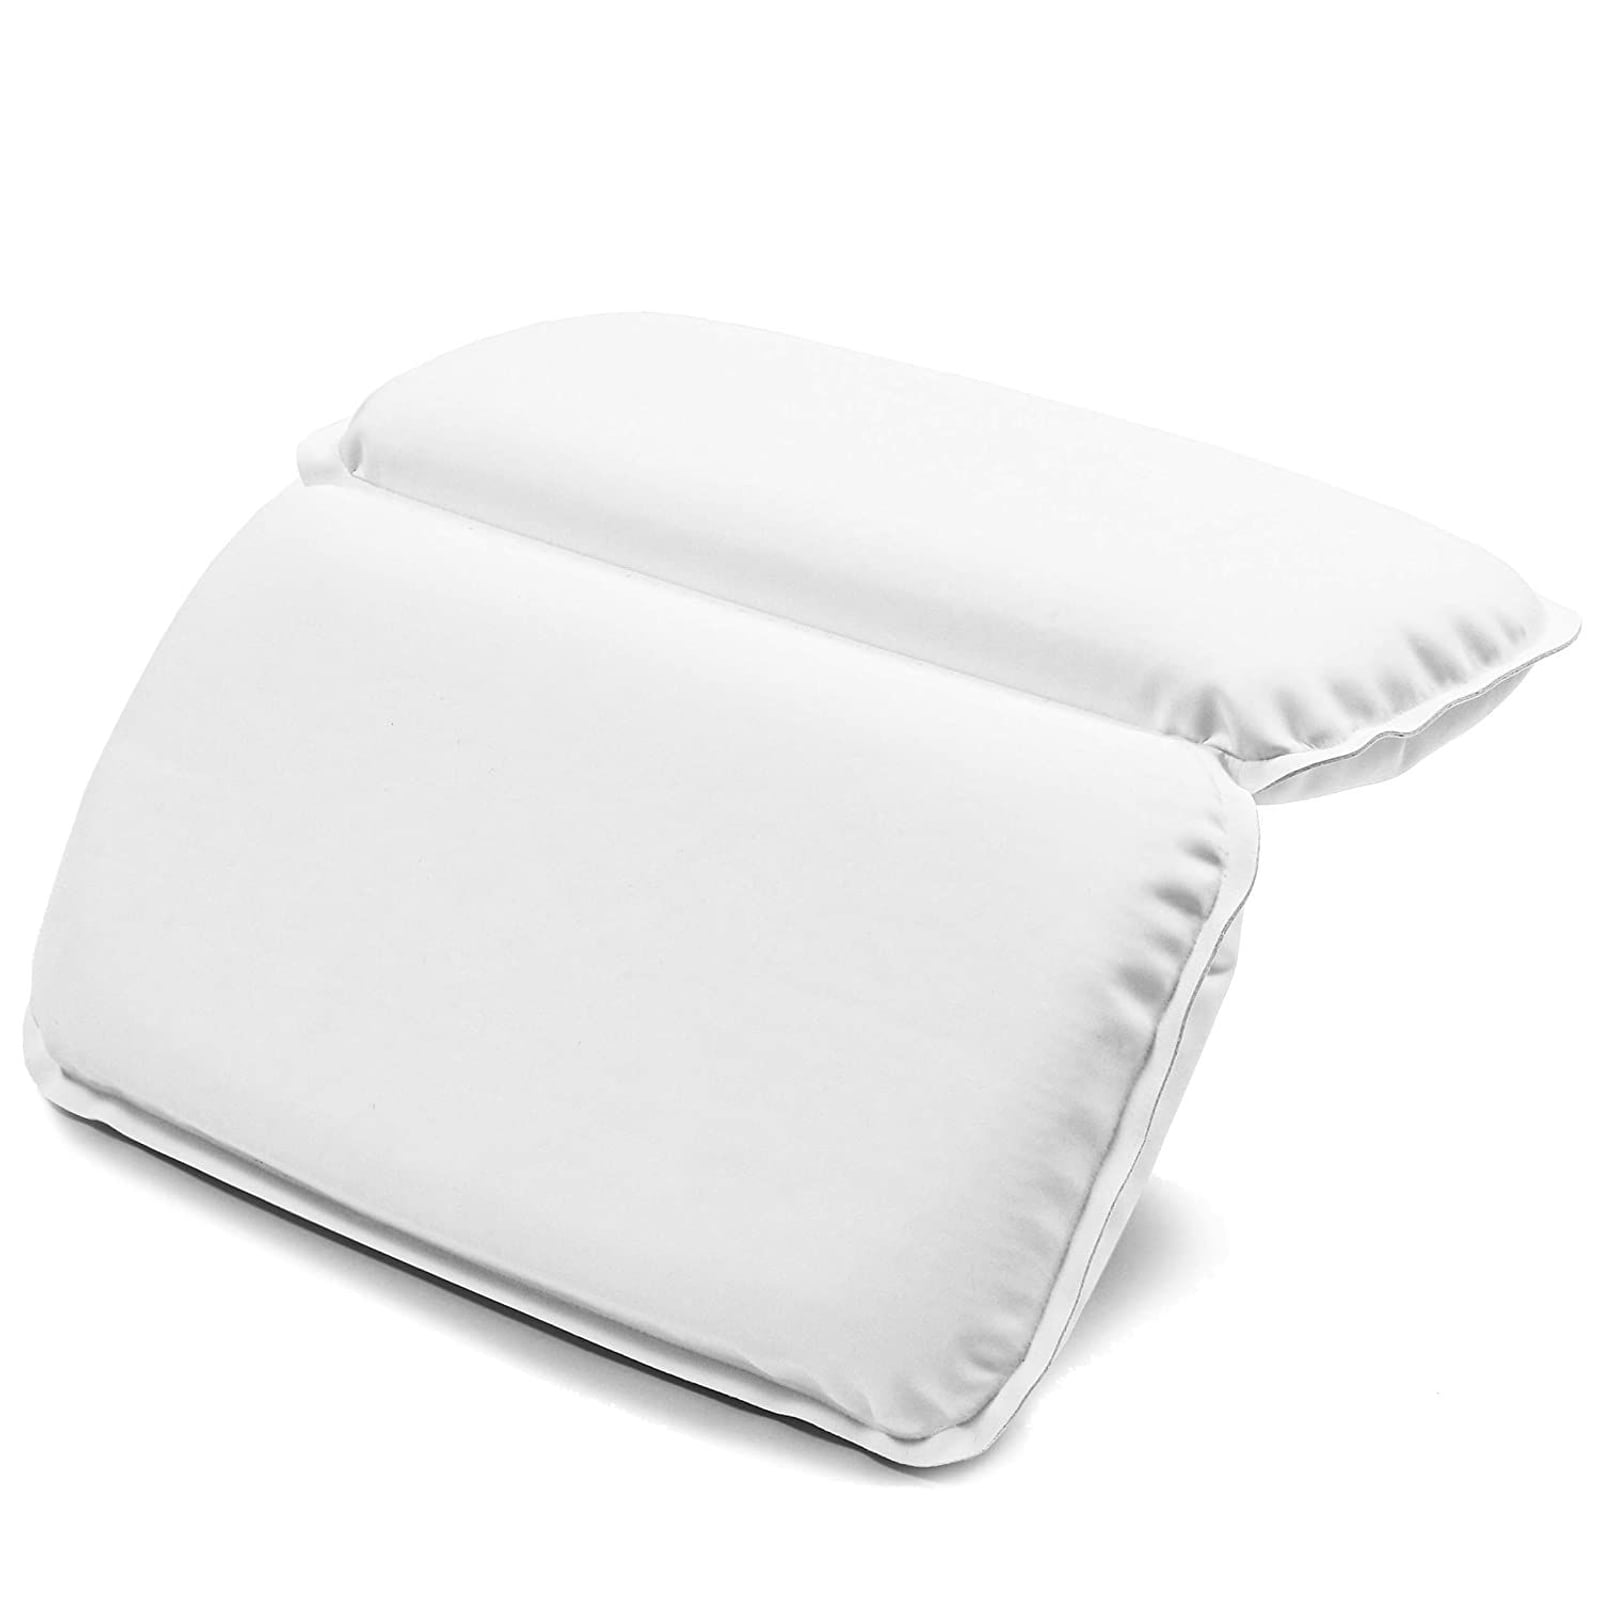 White Memory Foam Relaxing Cushioned Bath Spa Pillow Head Neck Rest Relax Body. 